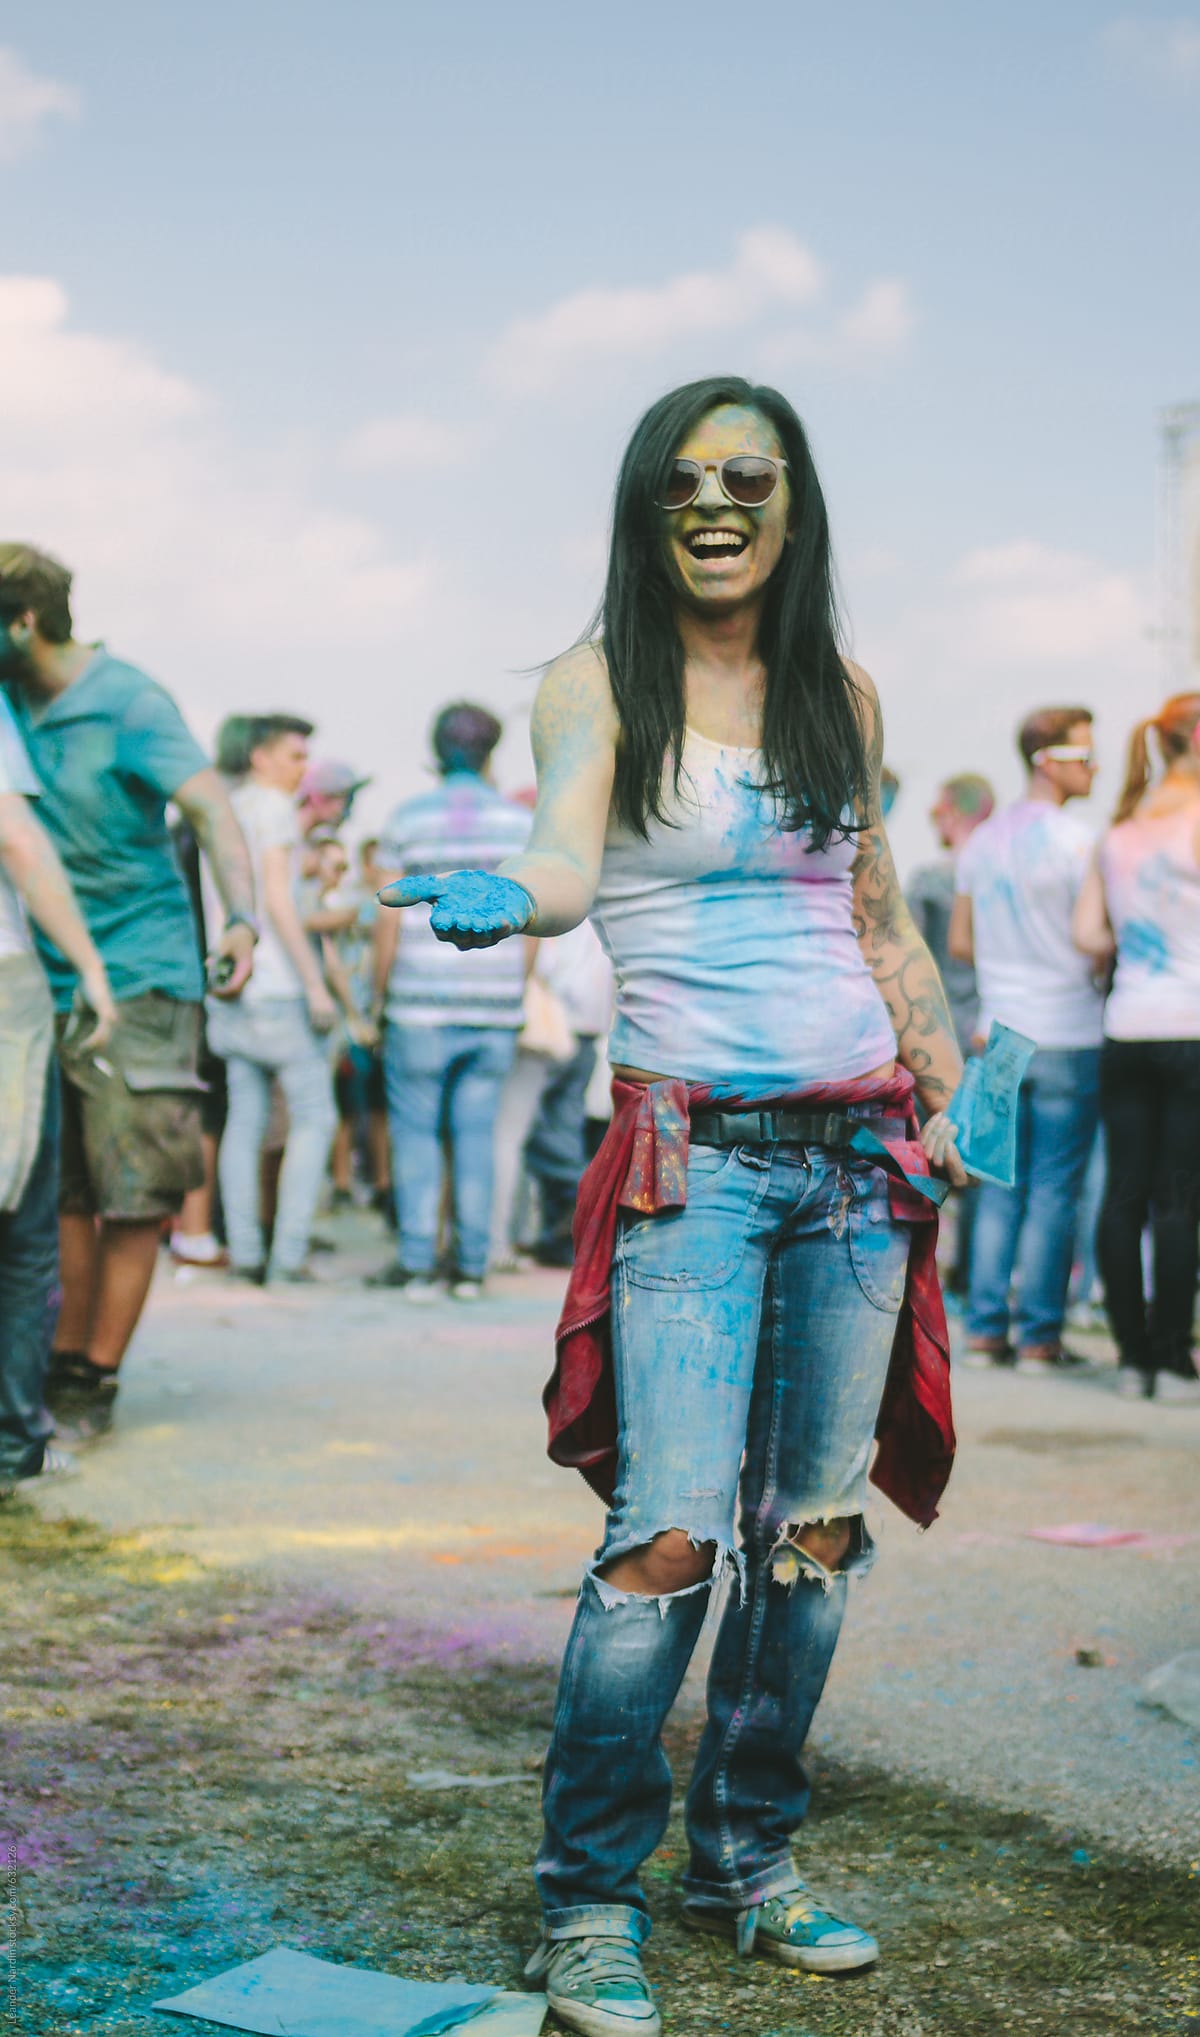 dirty colorful painted young woman laughing on an outdoor music festival